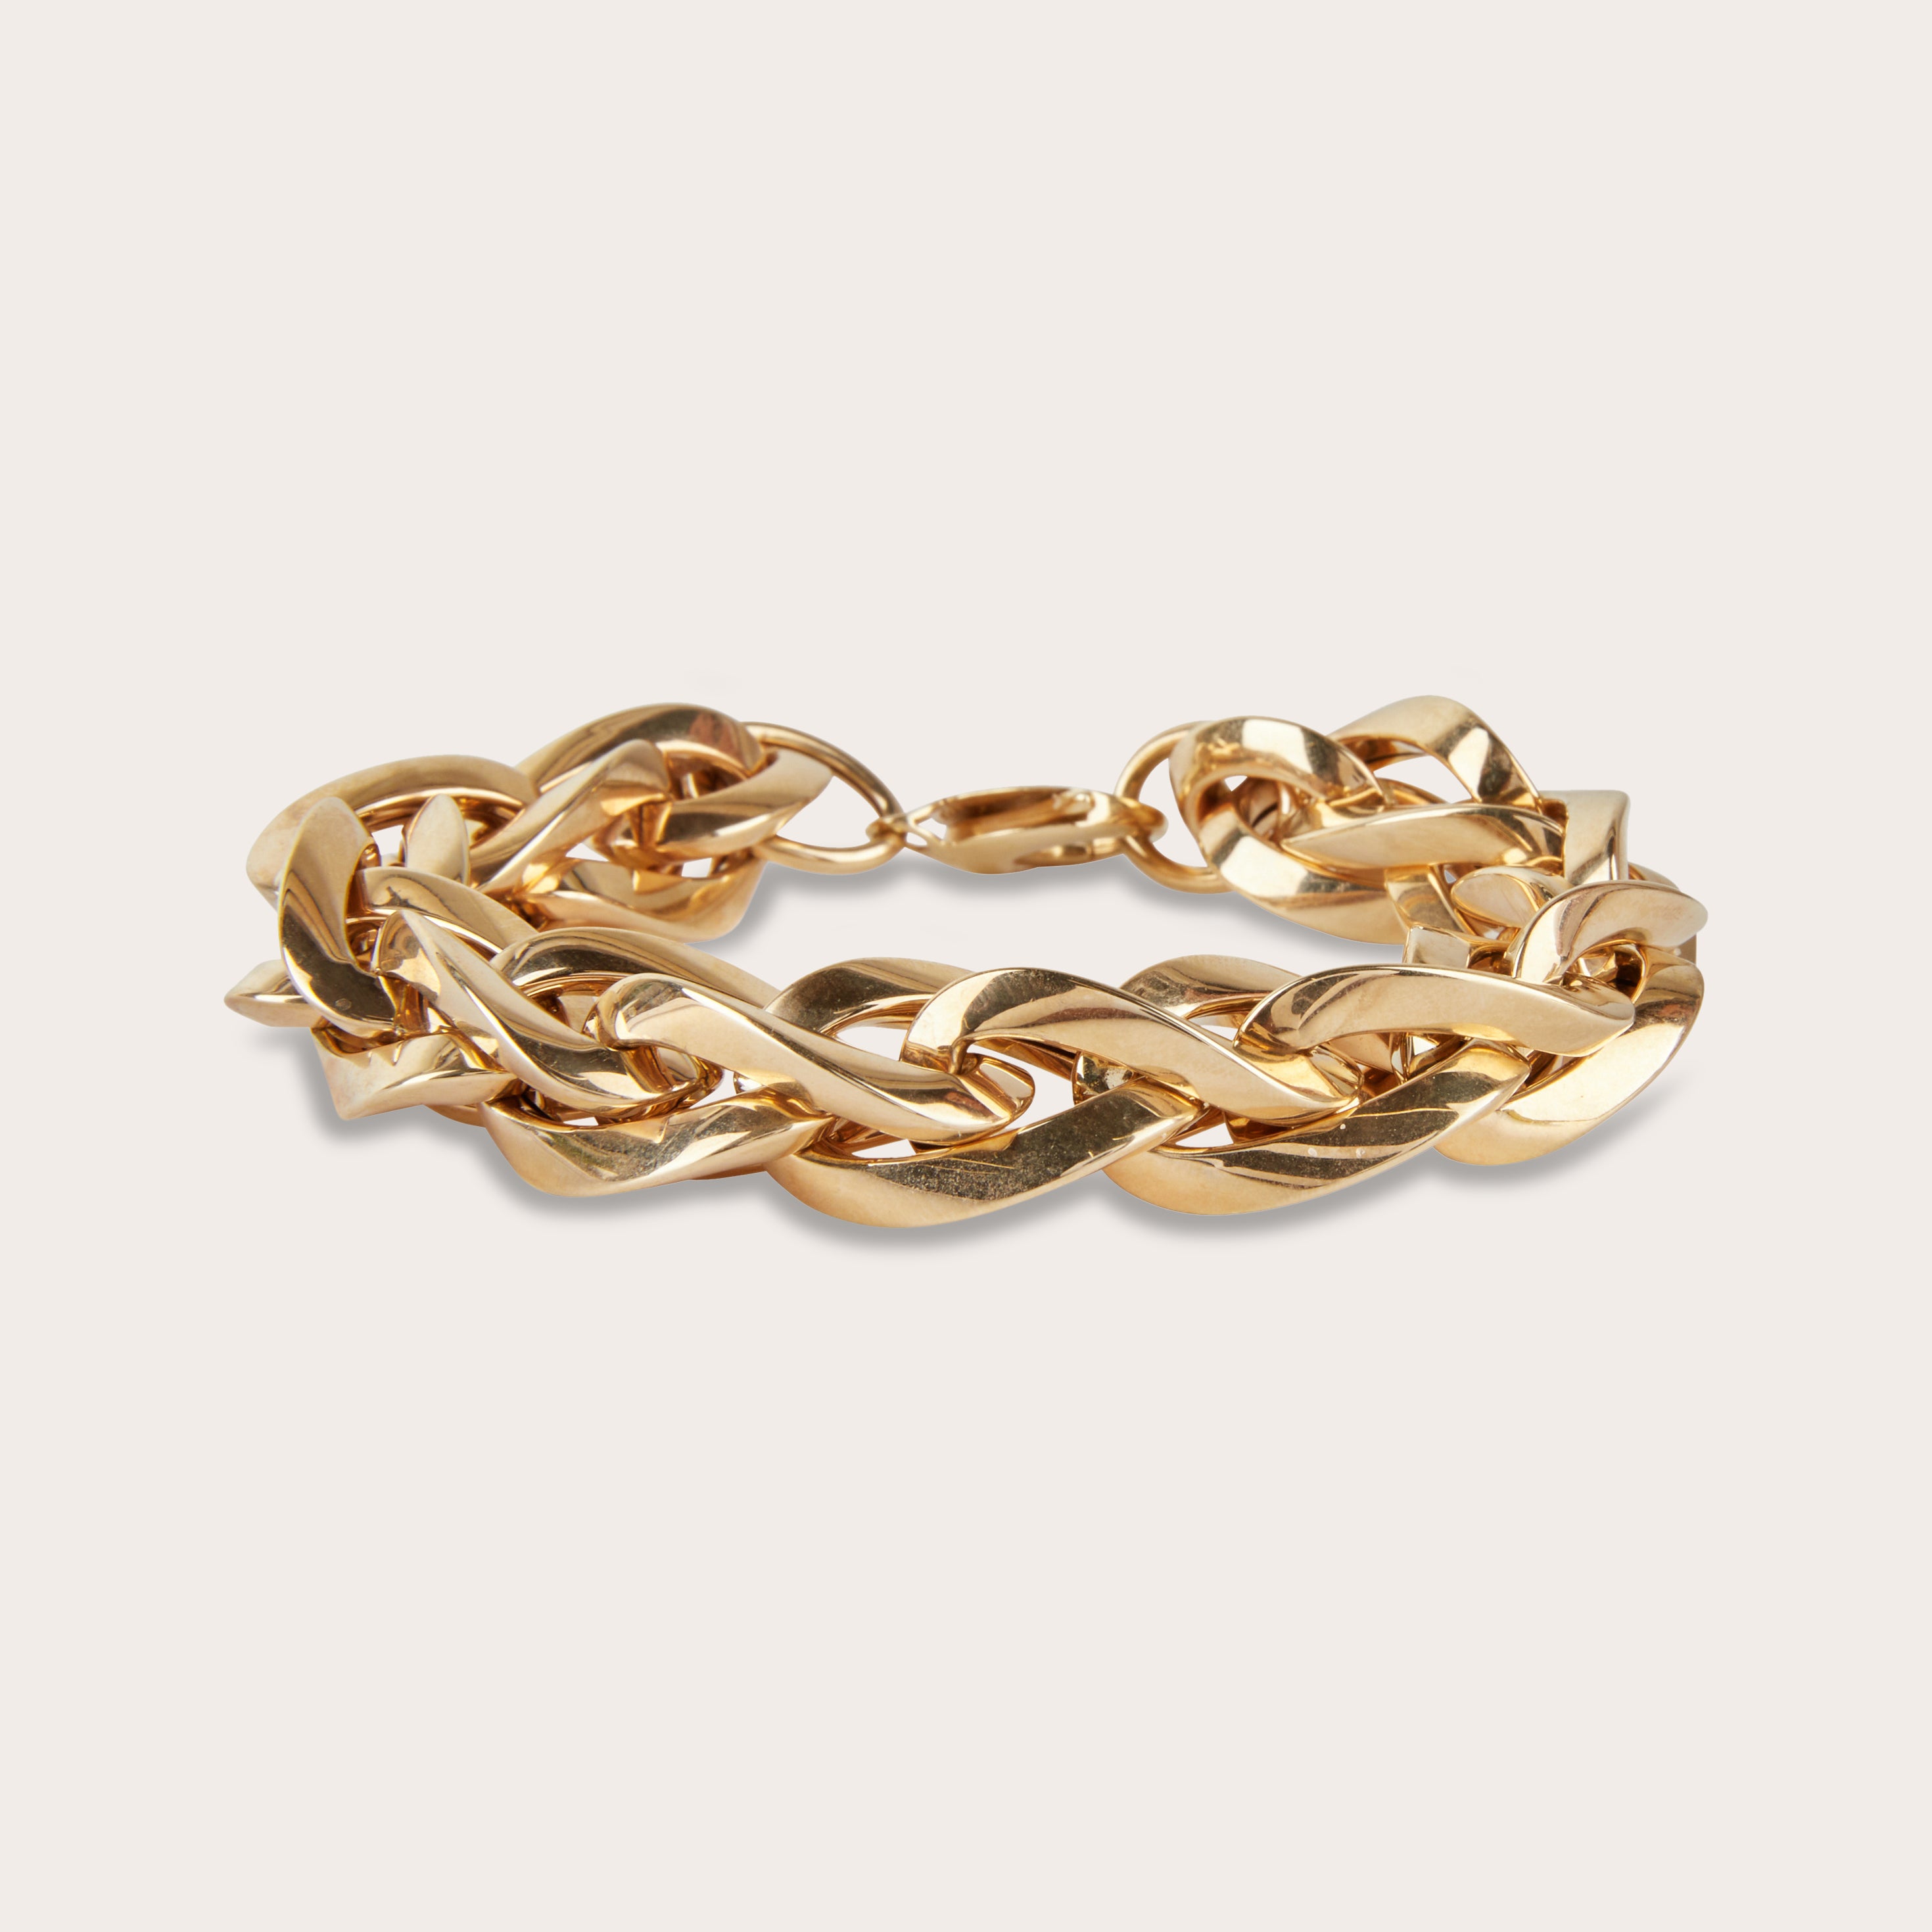 A Continental 14ct gold bracelet with 'J' pendant